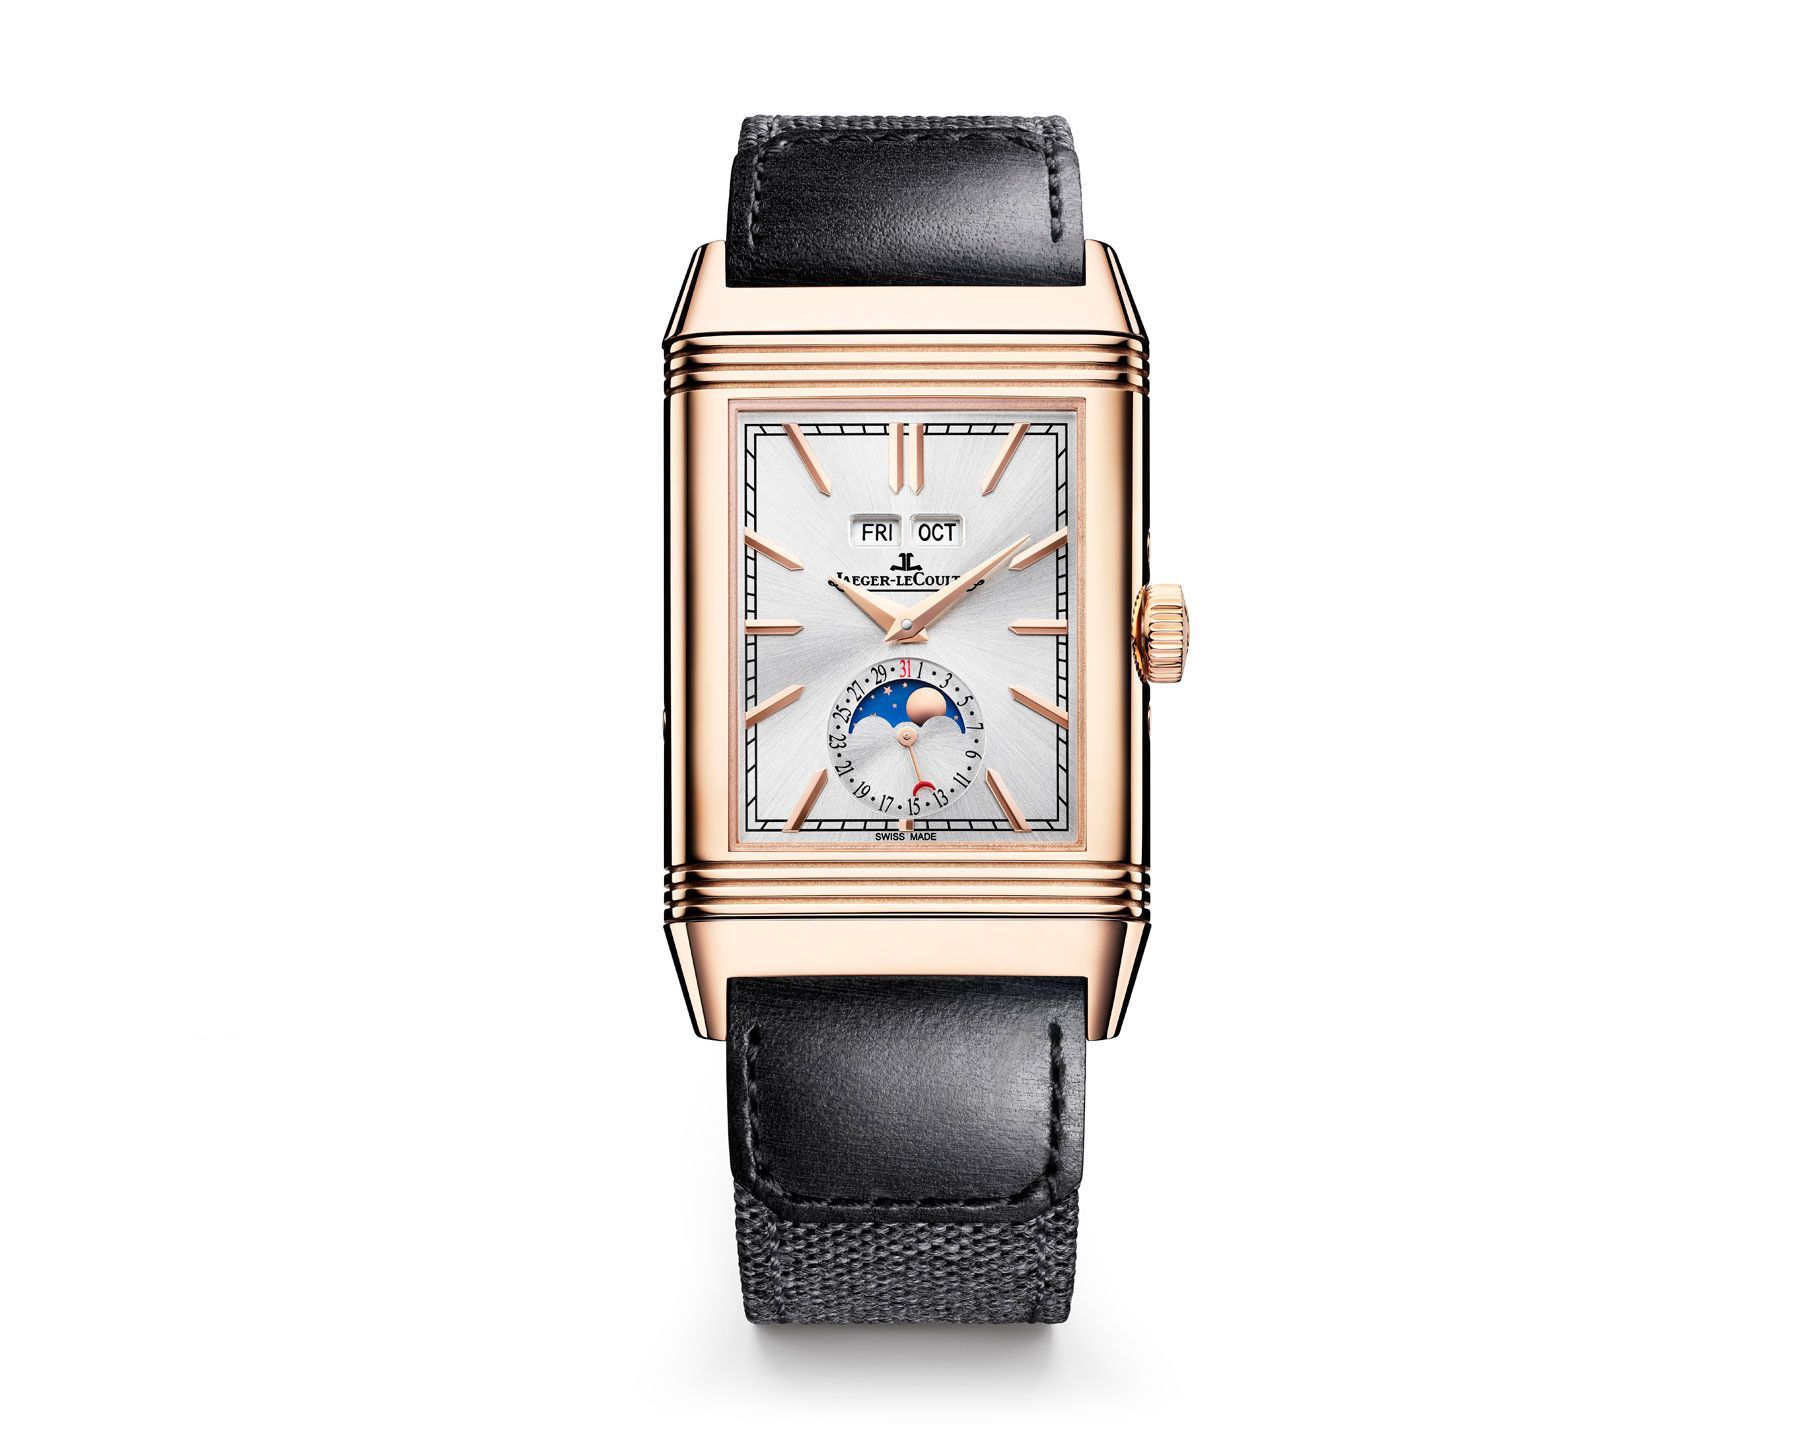 Jaeger-LeCoultre Reverso Reverso Tribute Silver & Grey Dial 29.9 mm Manual Winding Watch For Men - 7